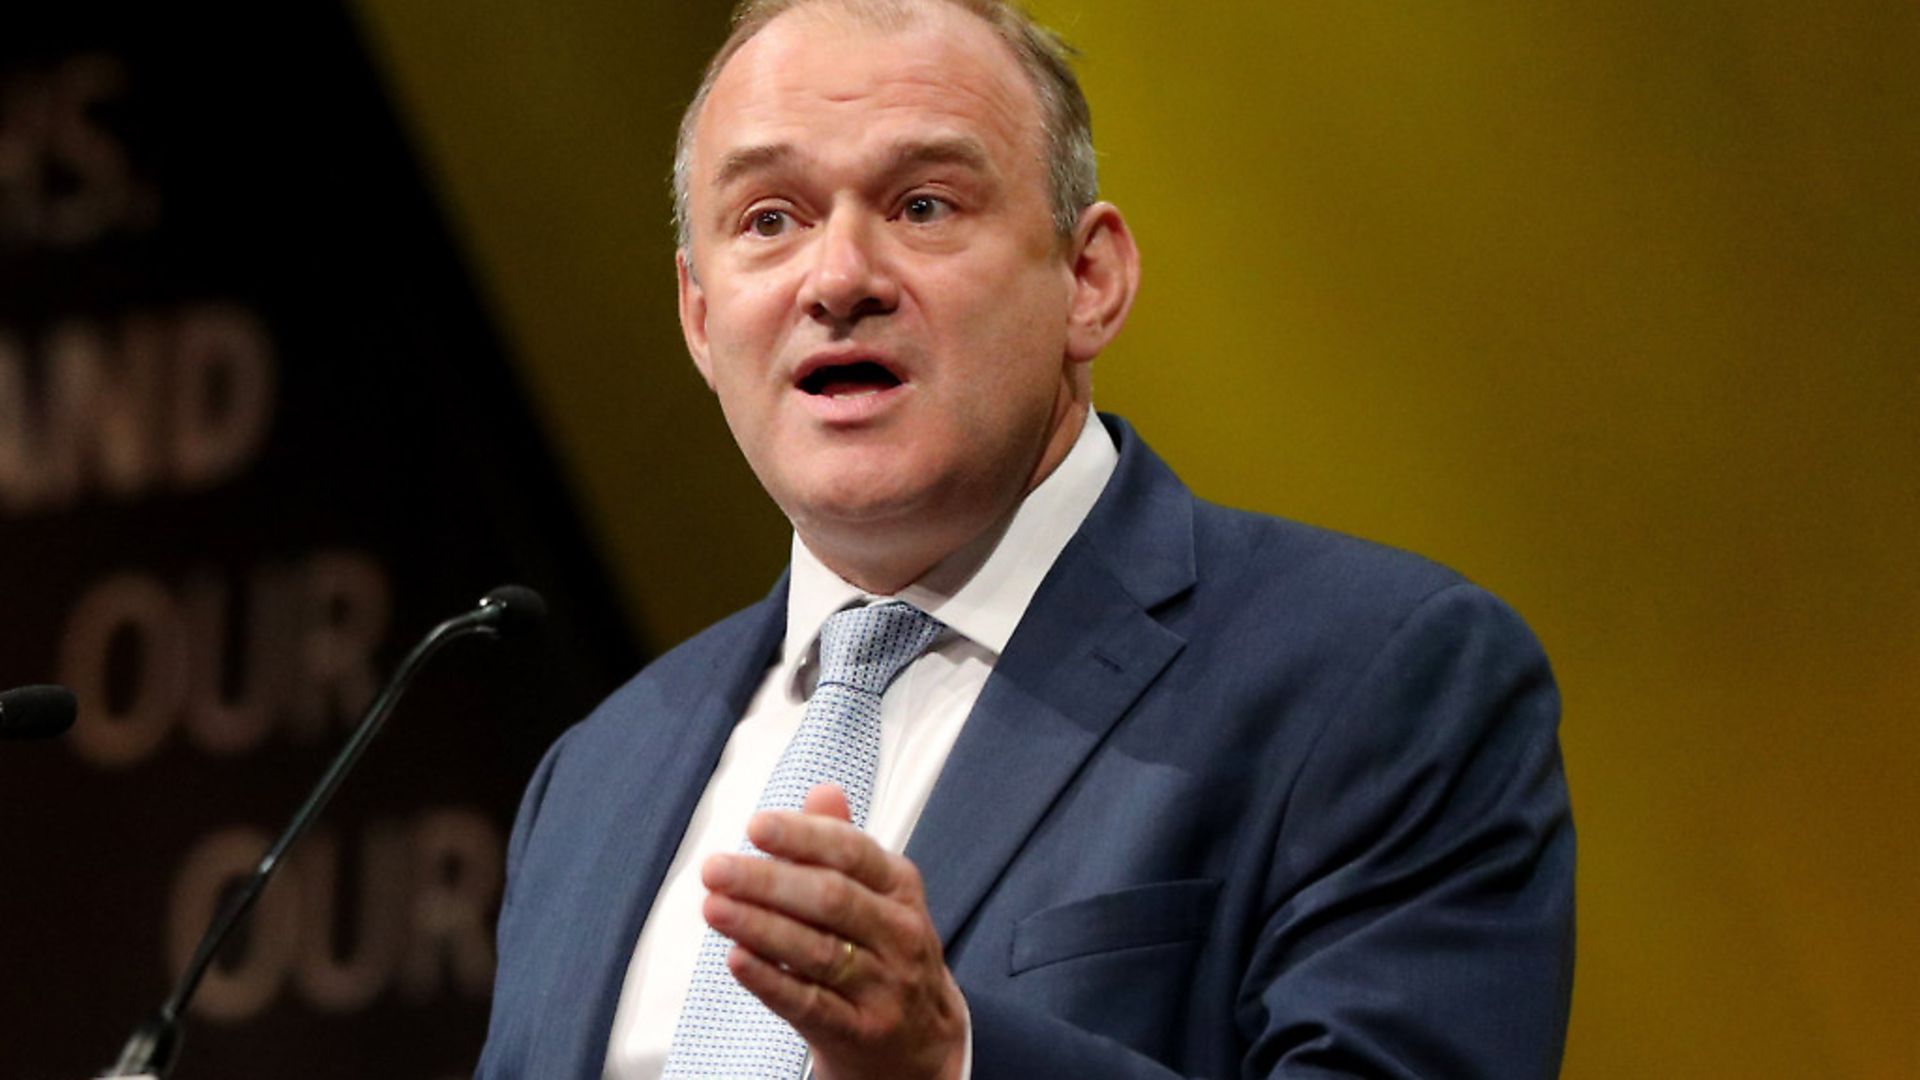 Sir Ed Davey has said that 2020 presents a 'huge opportunity' for the Lib Dems. Photograph: Jonathan Brady/PA. - Credit: PA Wire/PA Images